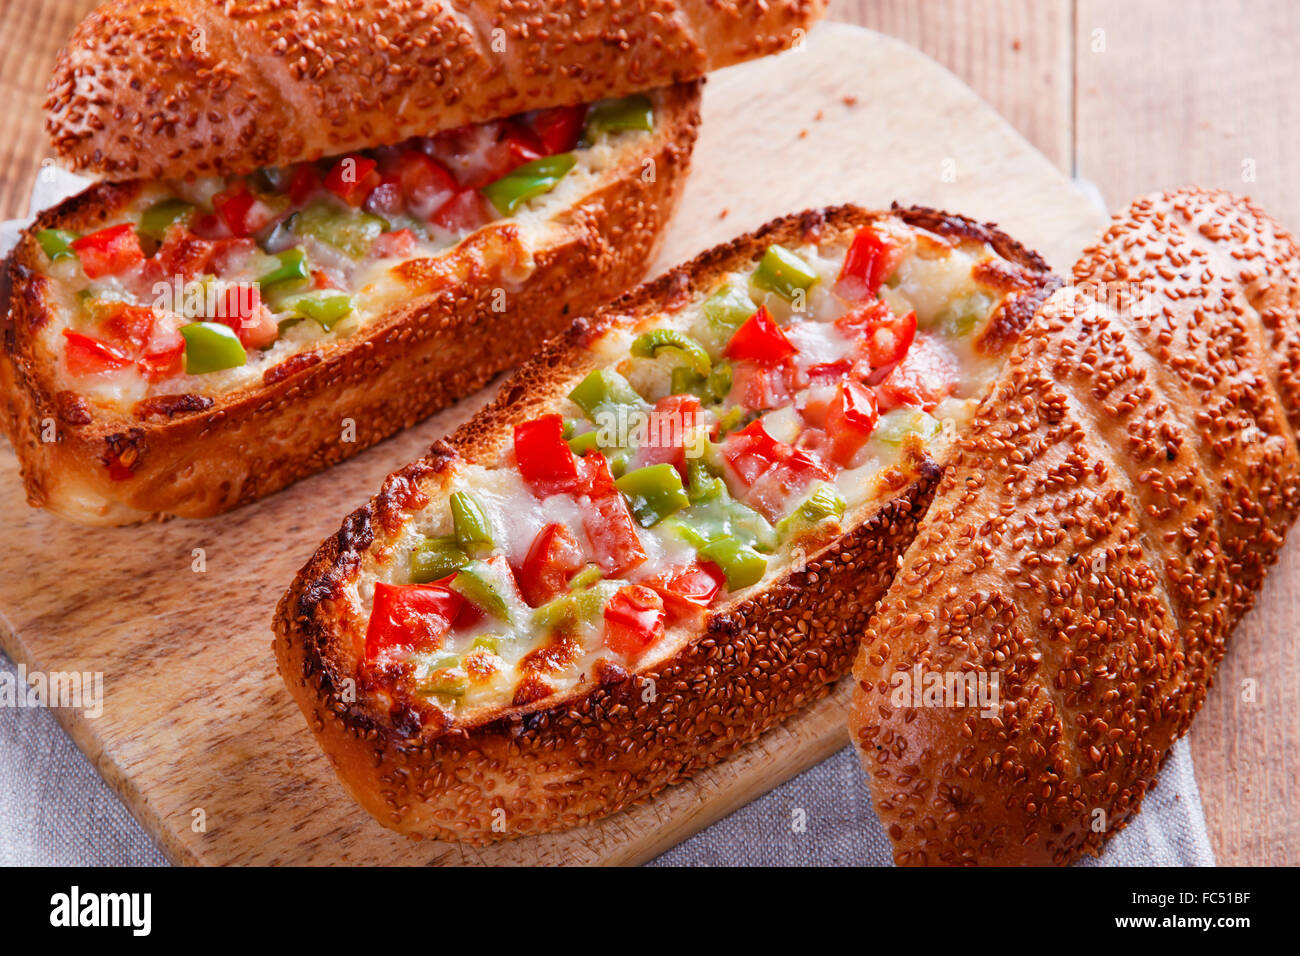 baked baguette stuffed with vegetables and cheese Stock Photo